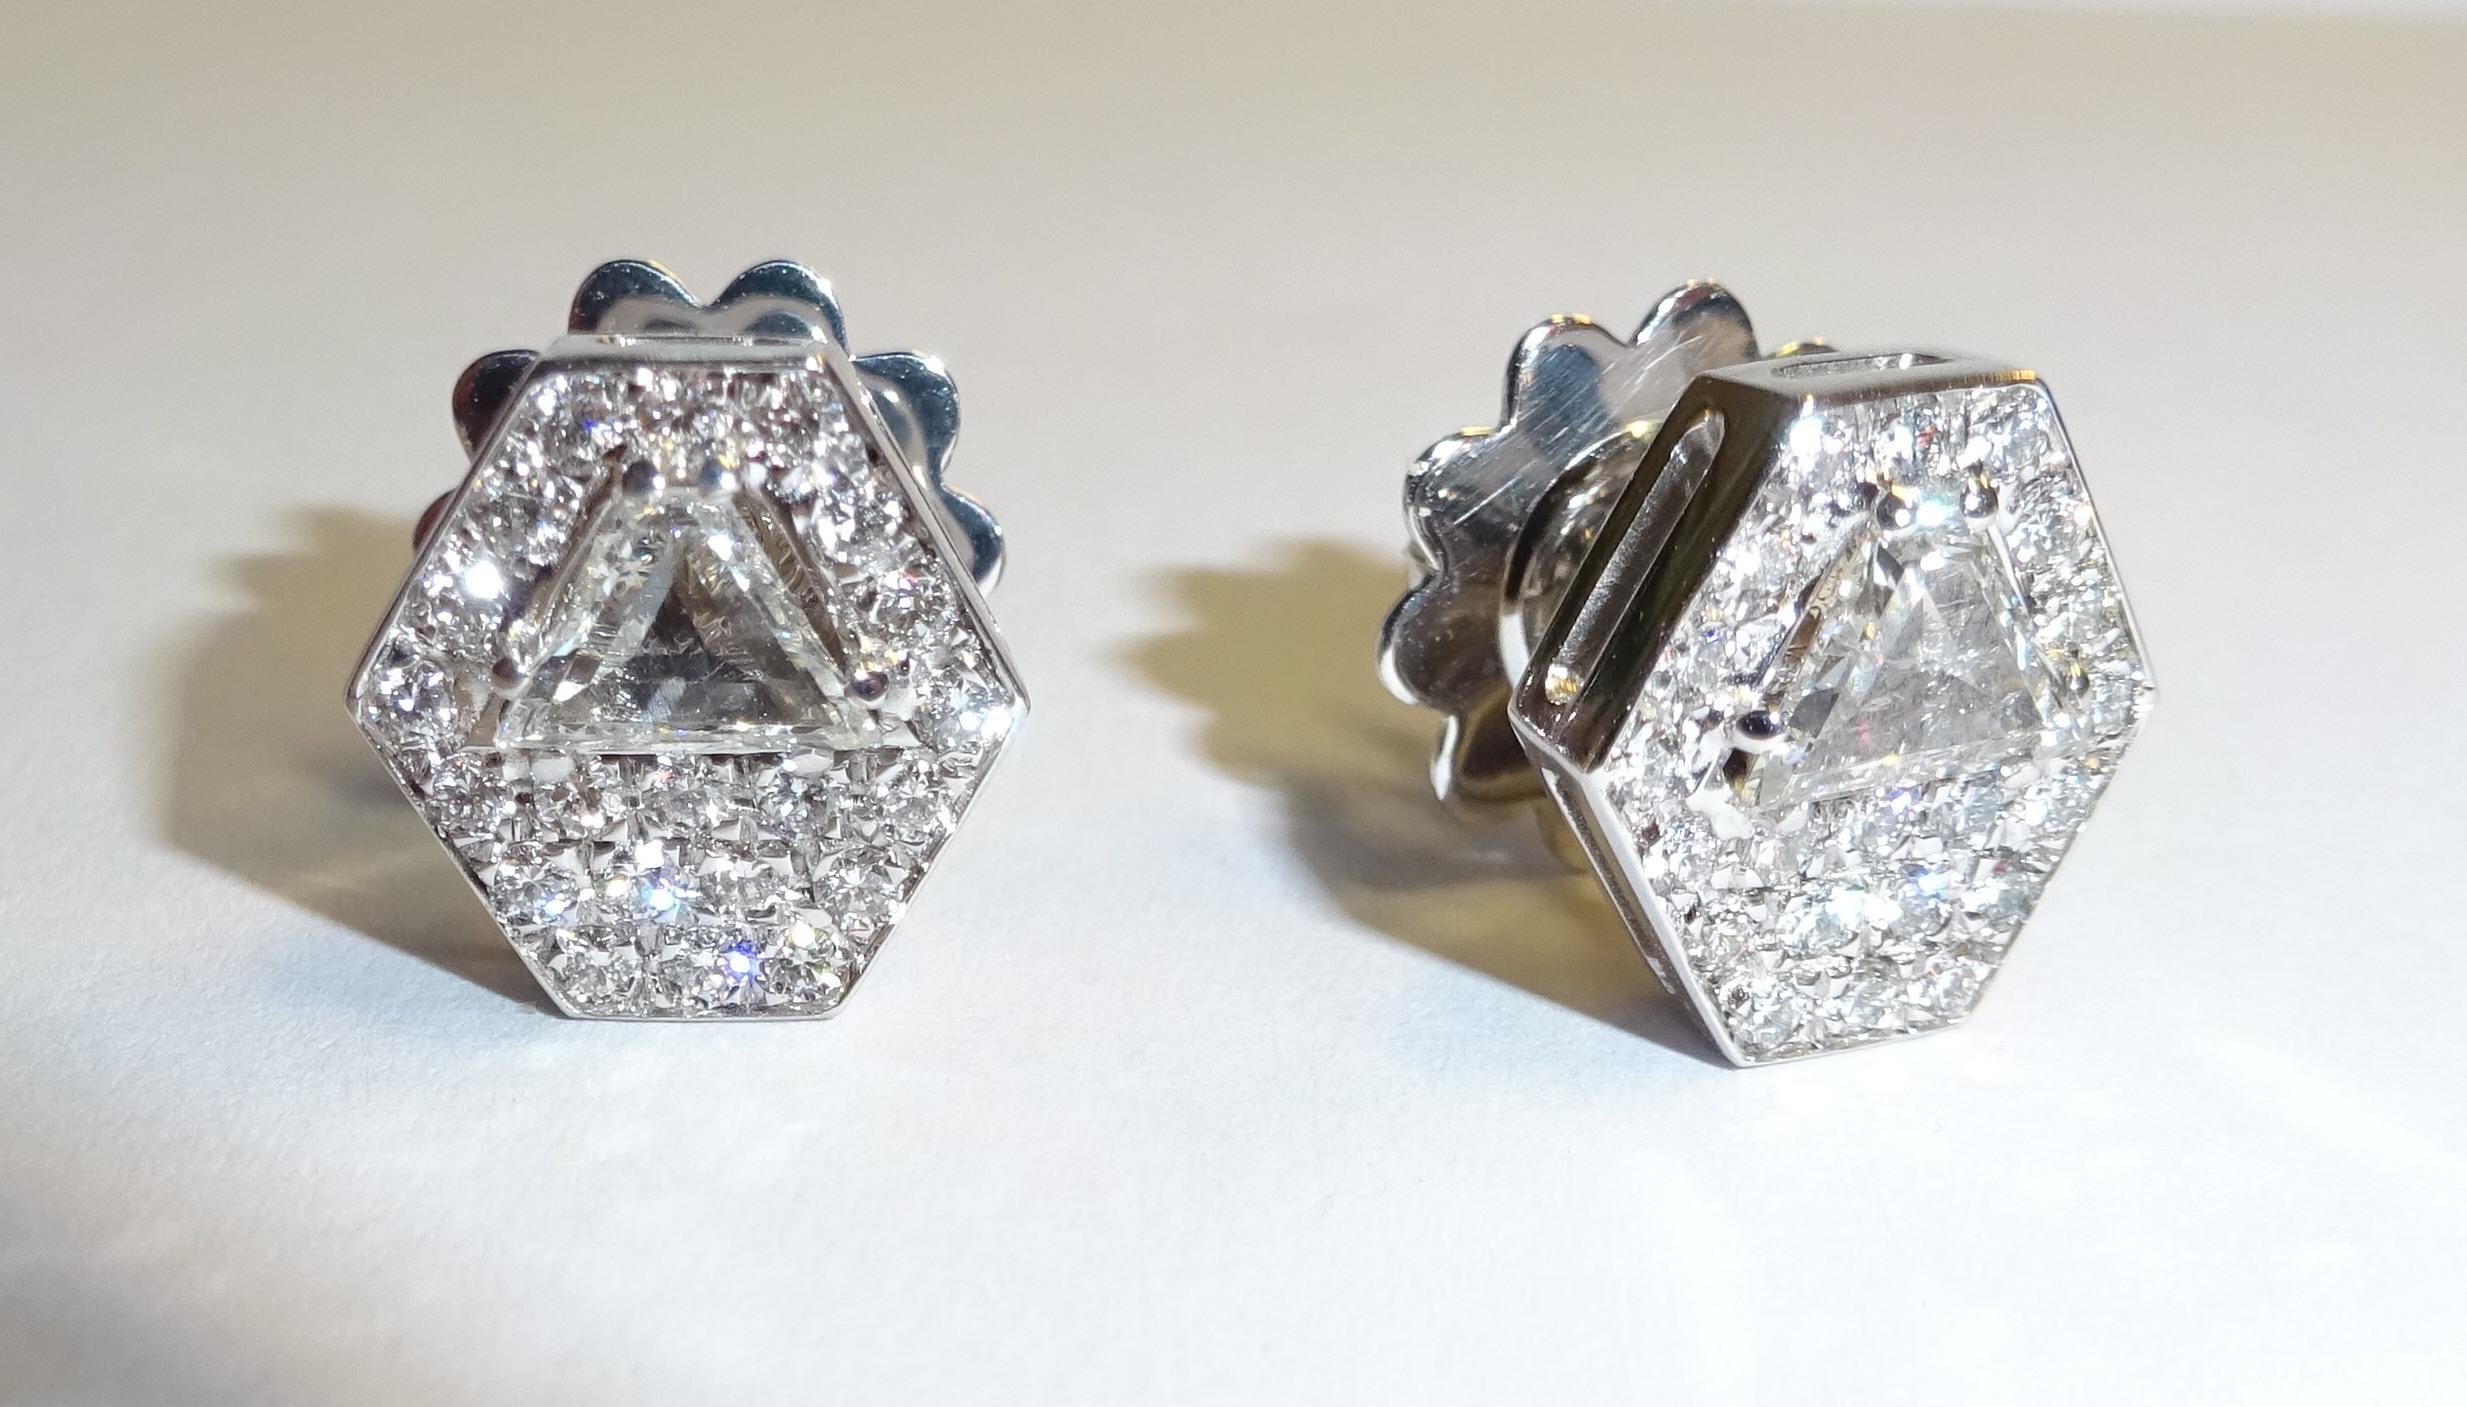 18 Karat White Gold Diamond  Earrings

42 Diamanten 0.39 Carat
2 Diam. Trap 0.59 Carat



Founded in 1974, Gianni Lazzaro is a family-owned jewelery company based out of Düsseldorf, Germany.
Although rooted in Germany, Gianni Lazzaro's style and